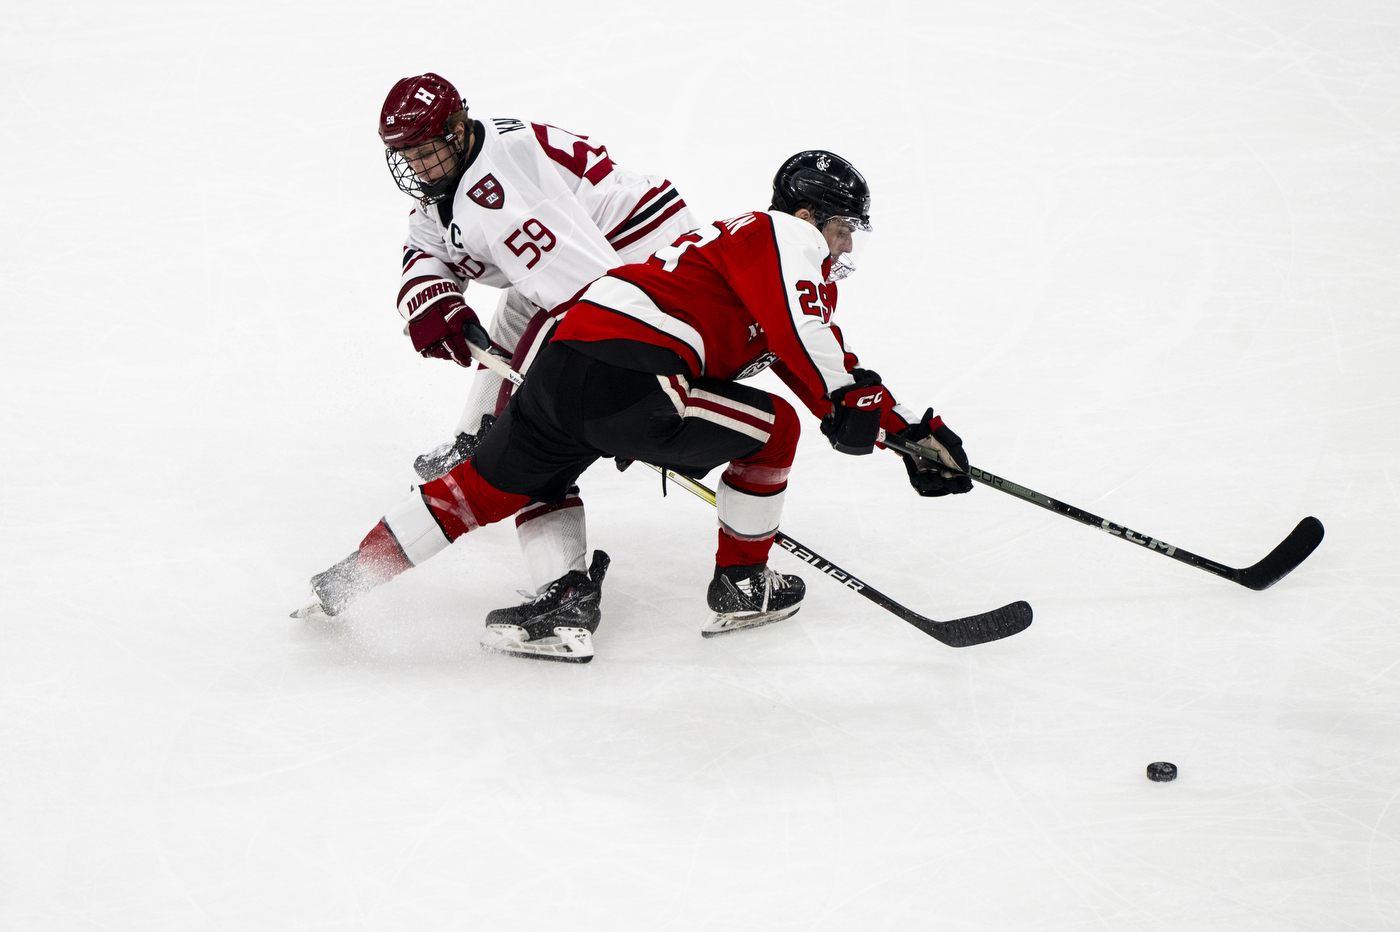 Northeastern hockey player skating past Harvard player with a puck.